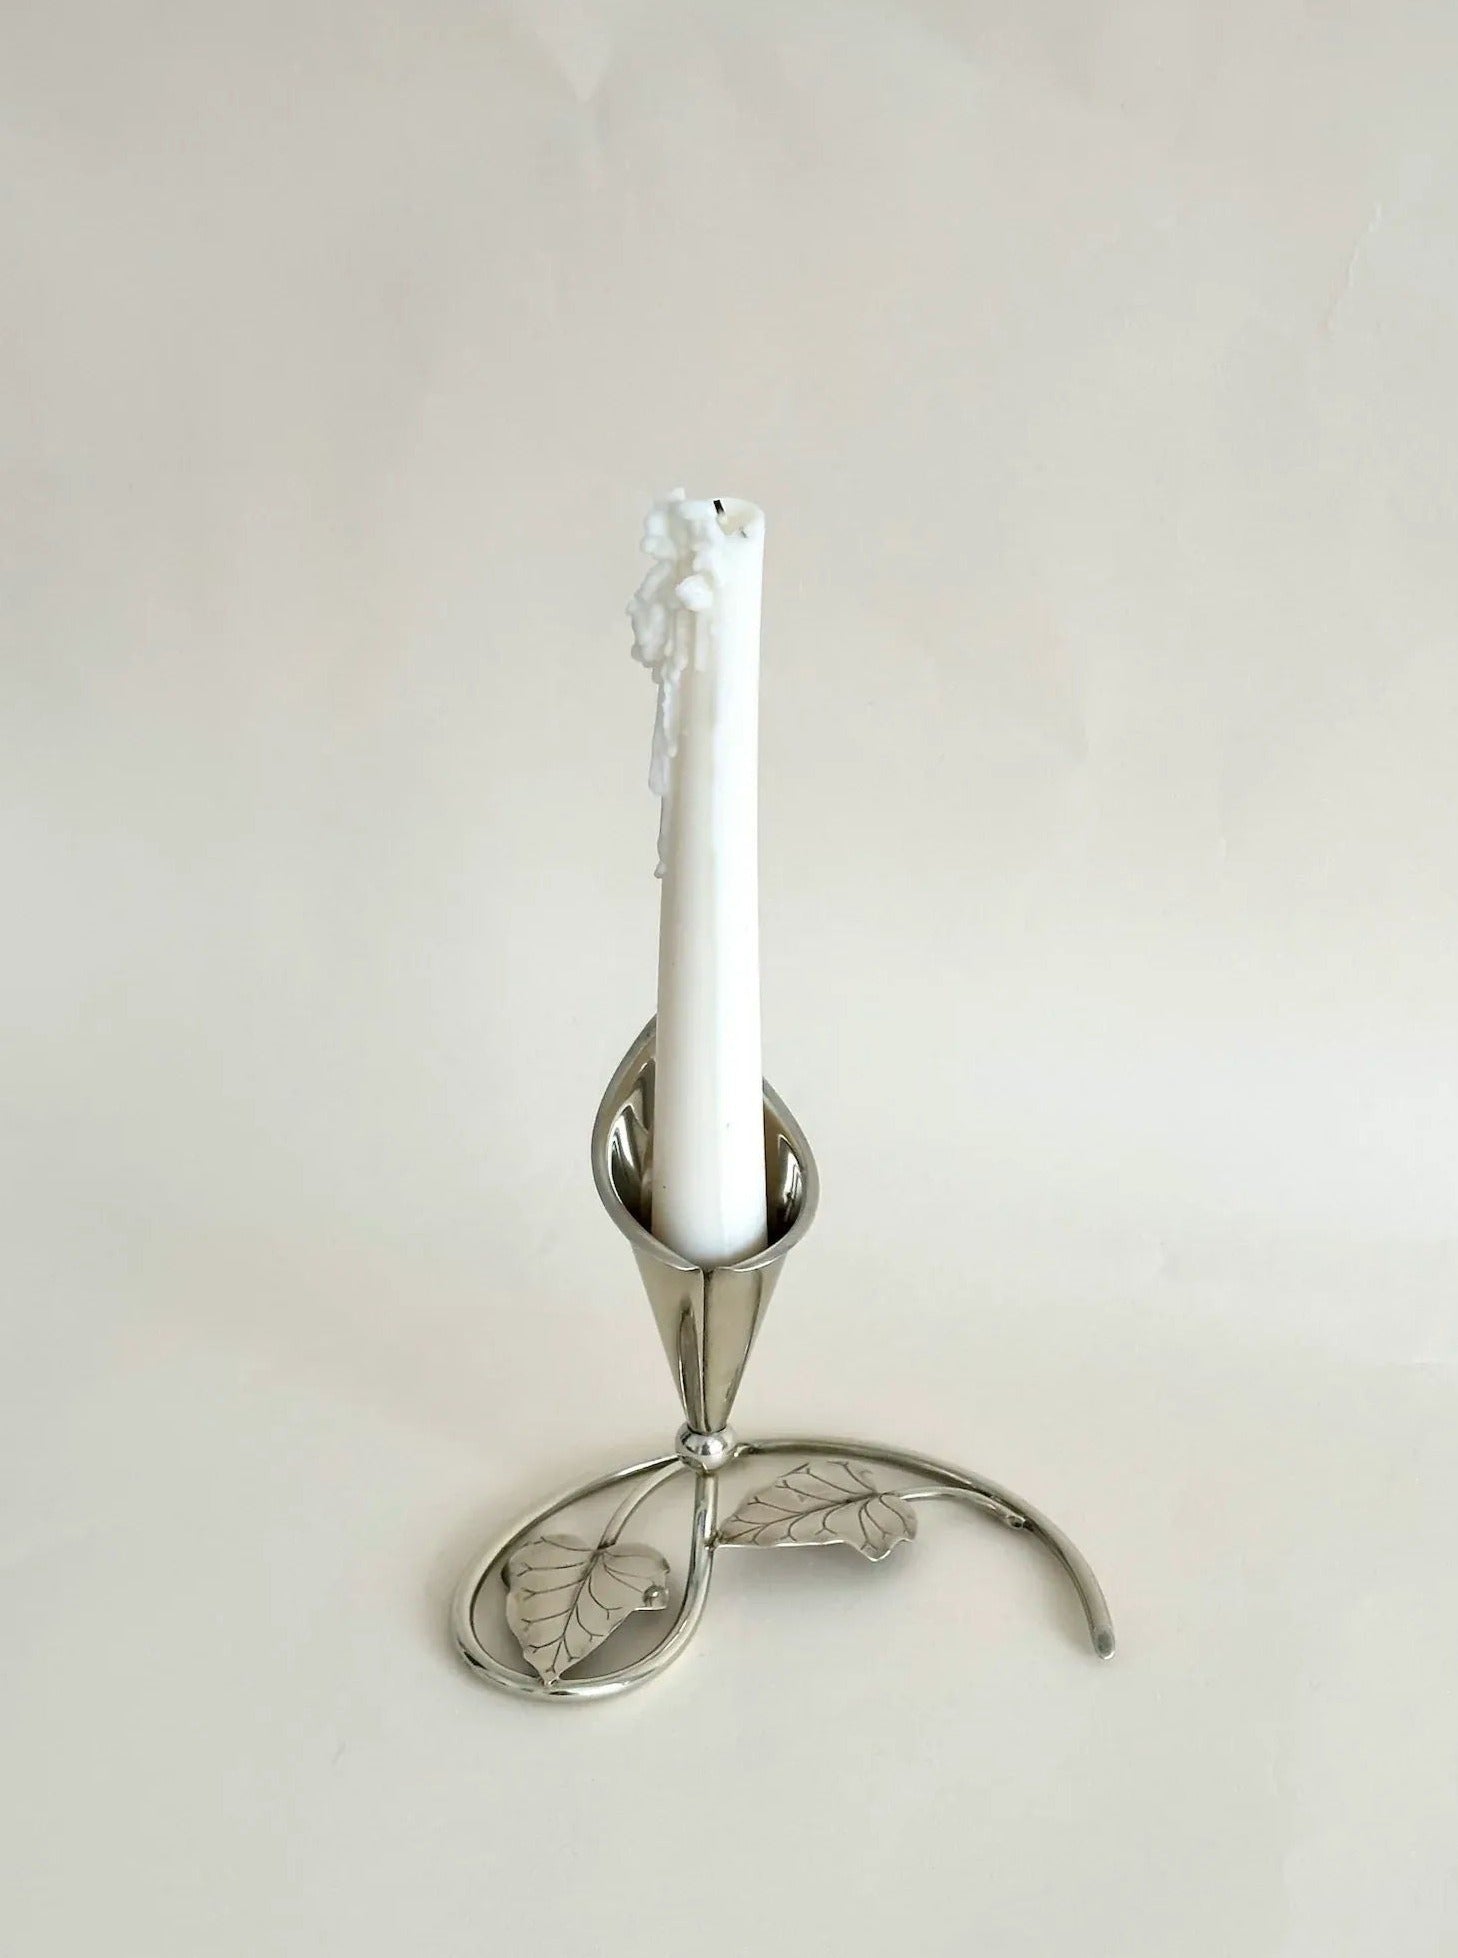 A melting white candle stands in an elegant silver Aesthete Label Cala Lily Candle Holder with botanical-inspired artistry, against a soft beige background.